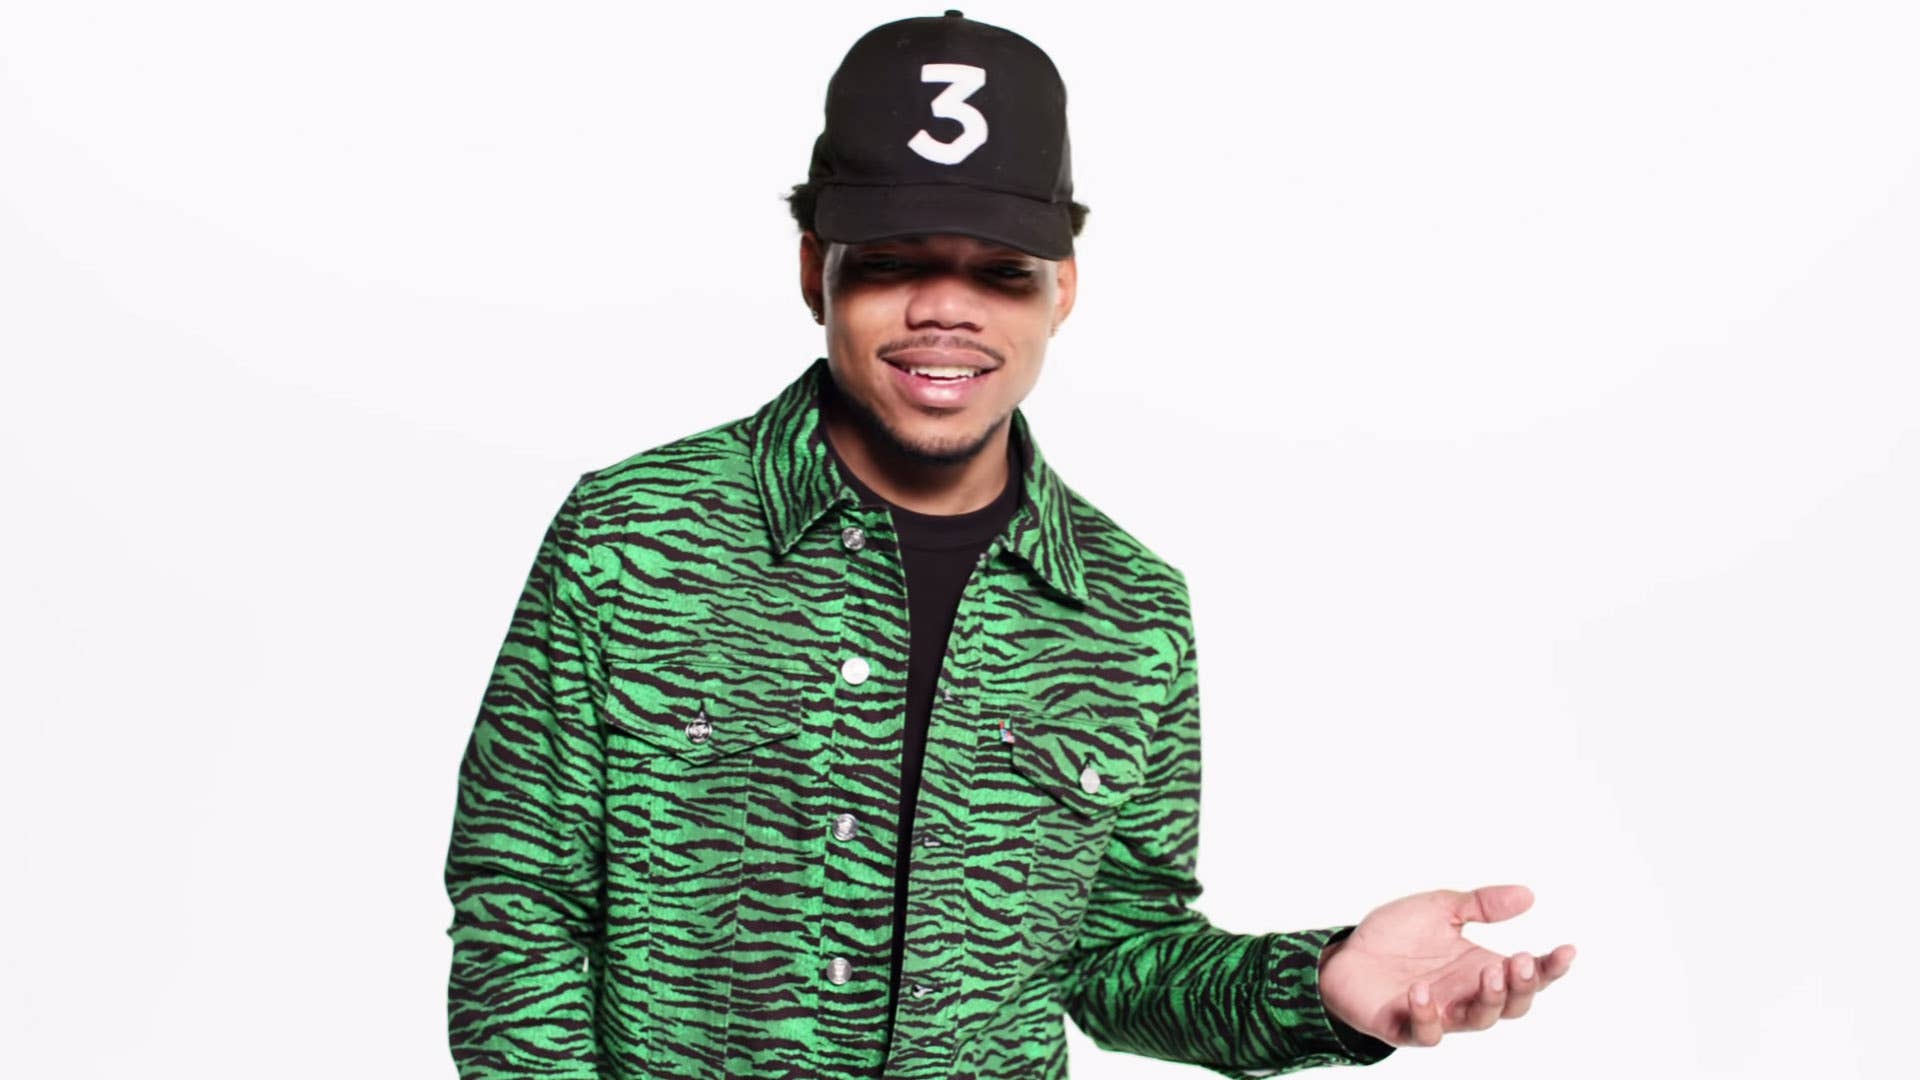 Chance the Rapper in H&M's new campaign